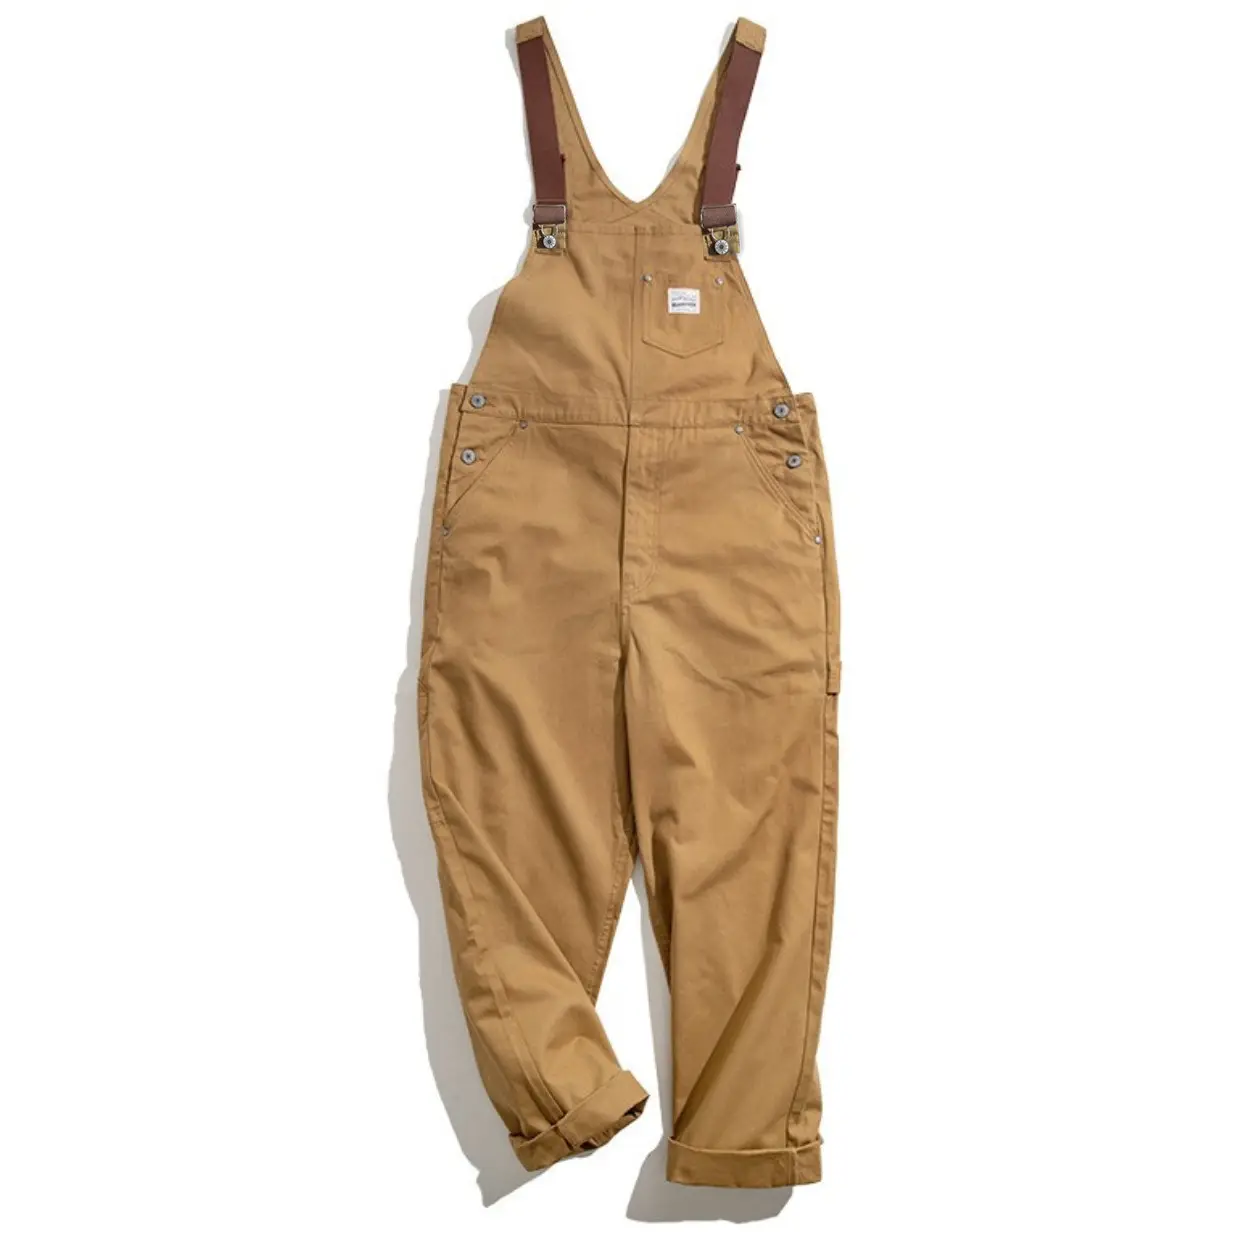 High Quality Retro Khaki Canvas Strap Pants Industry Workers Workwear Overalls Working Clothes